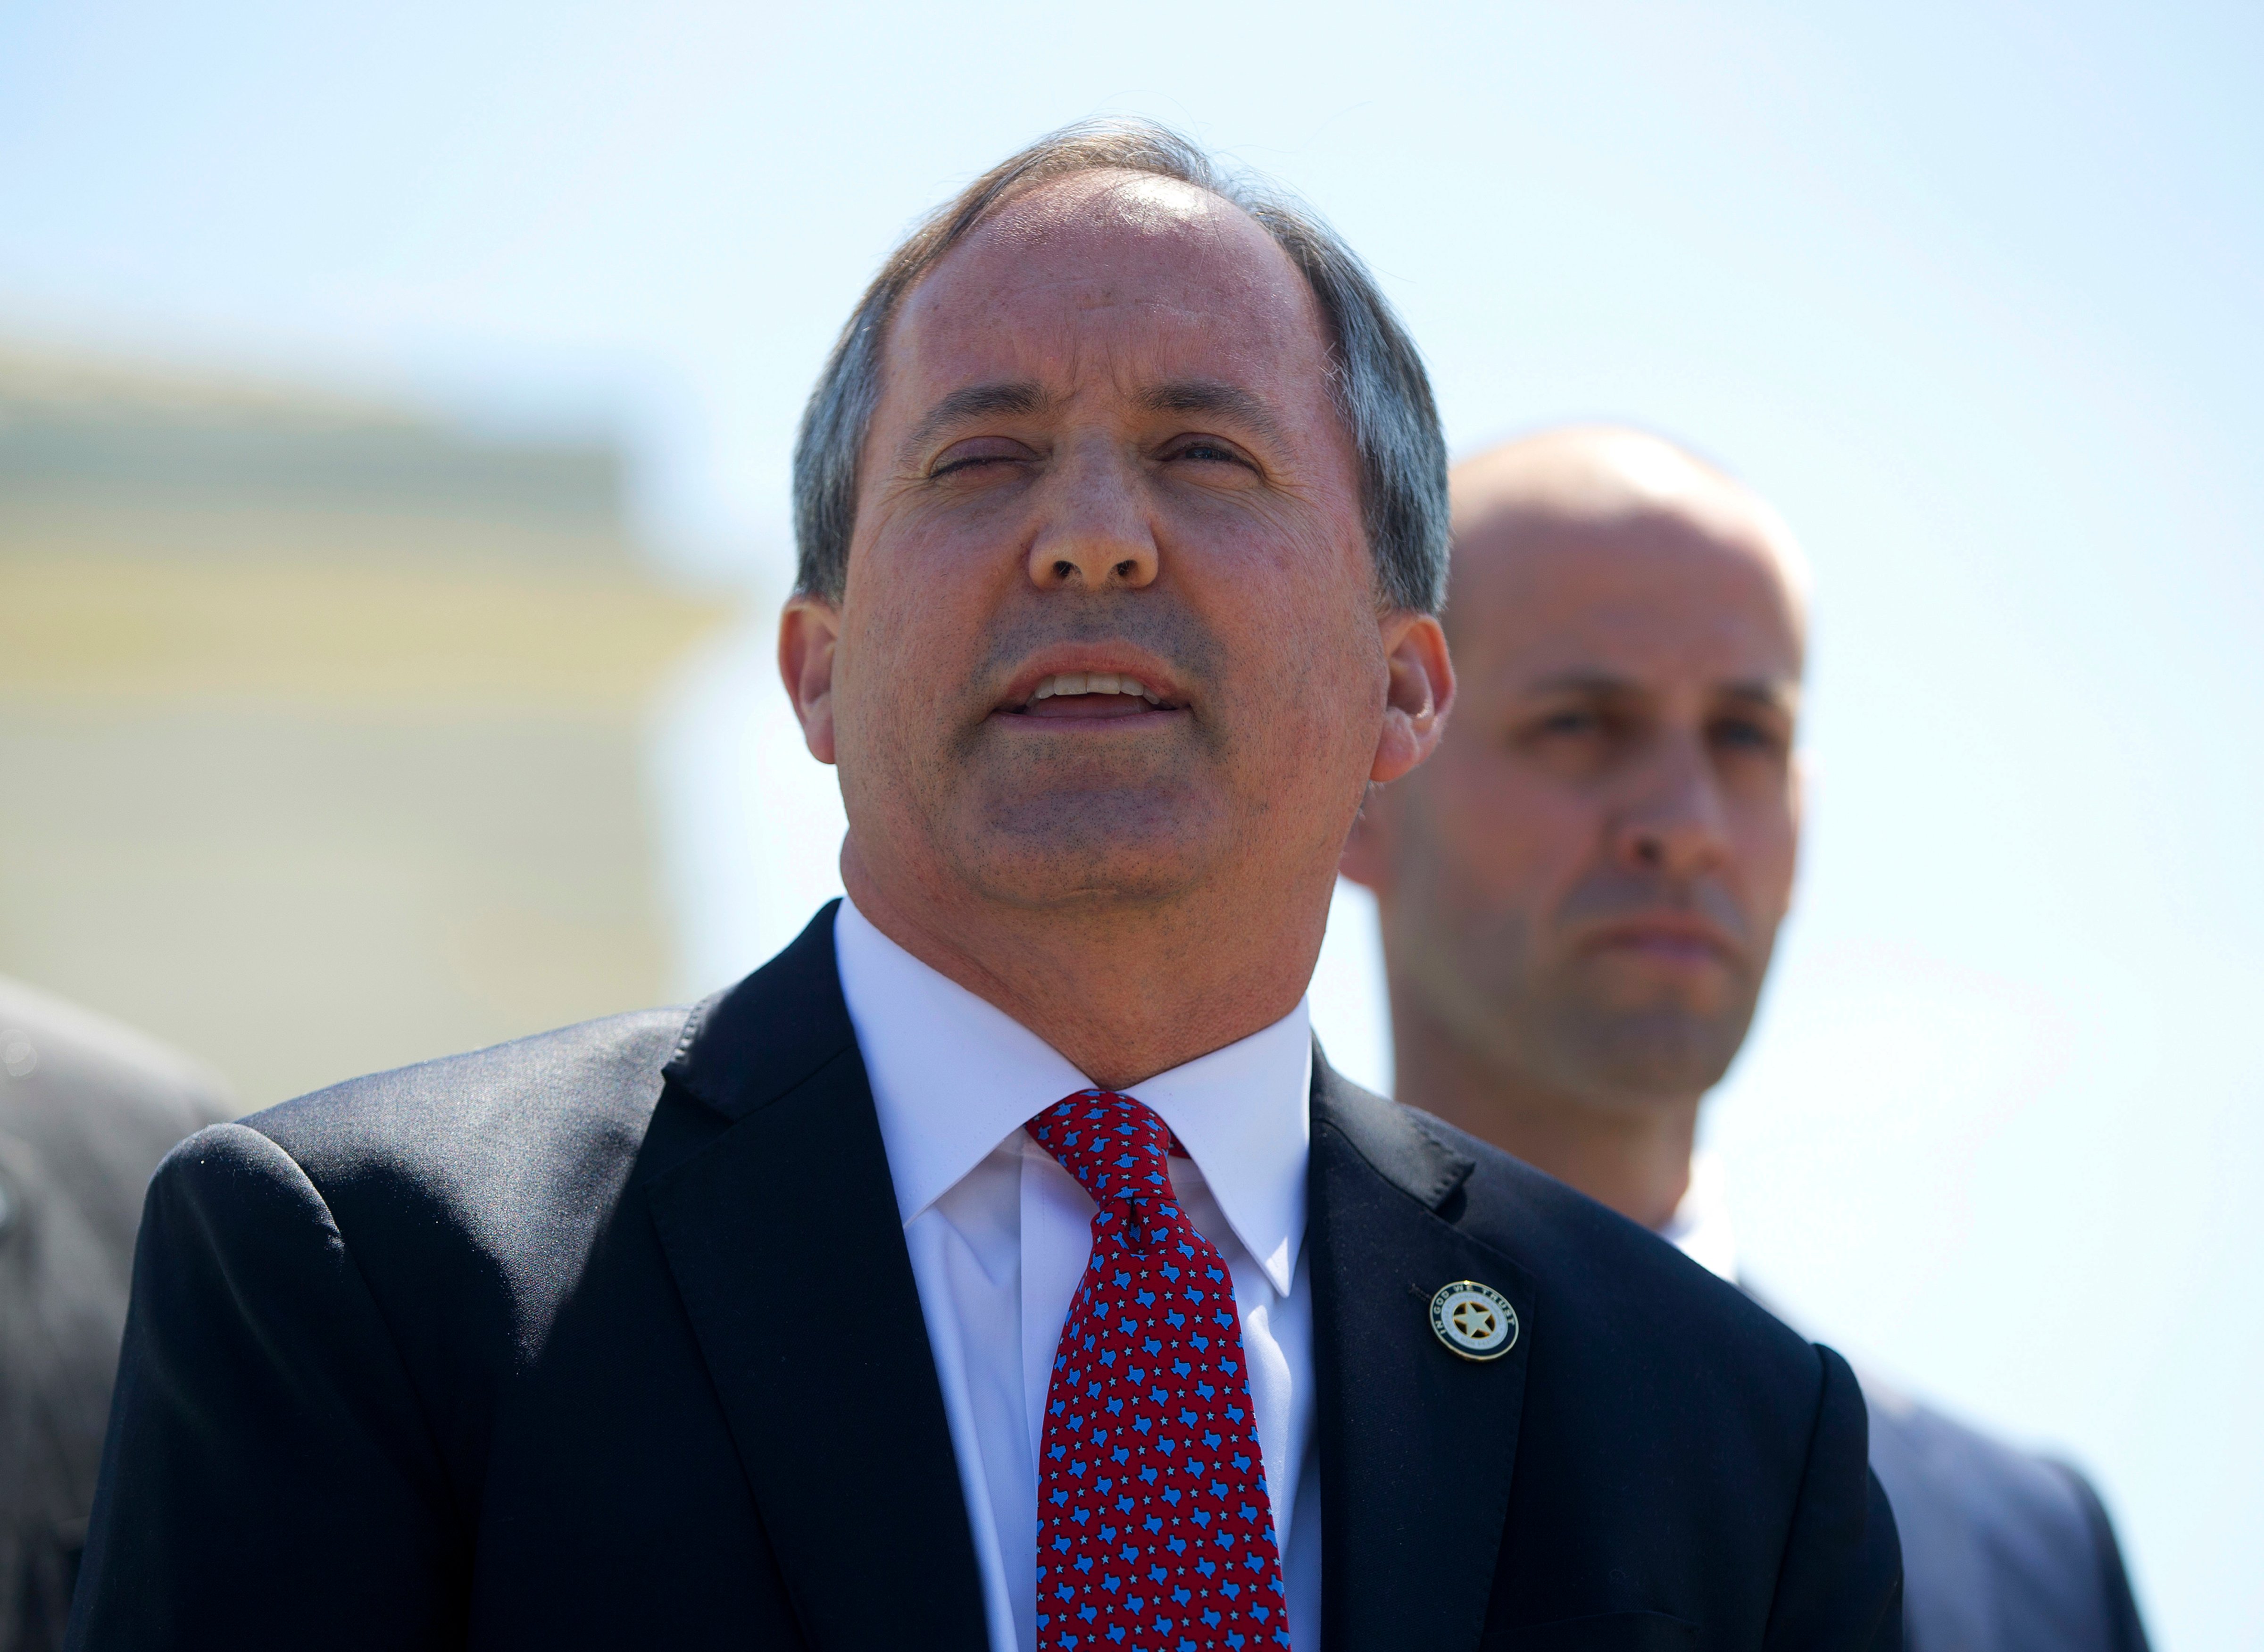 Texas Attorney General Ken Paxton meets with members of the media at the Supreme Court in Washington on April 18, 2016. (Pablo Martinez Monsivais&mdash;AP)